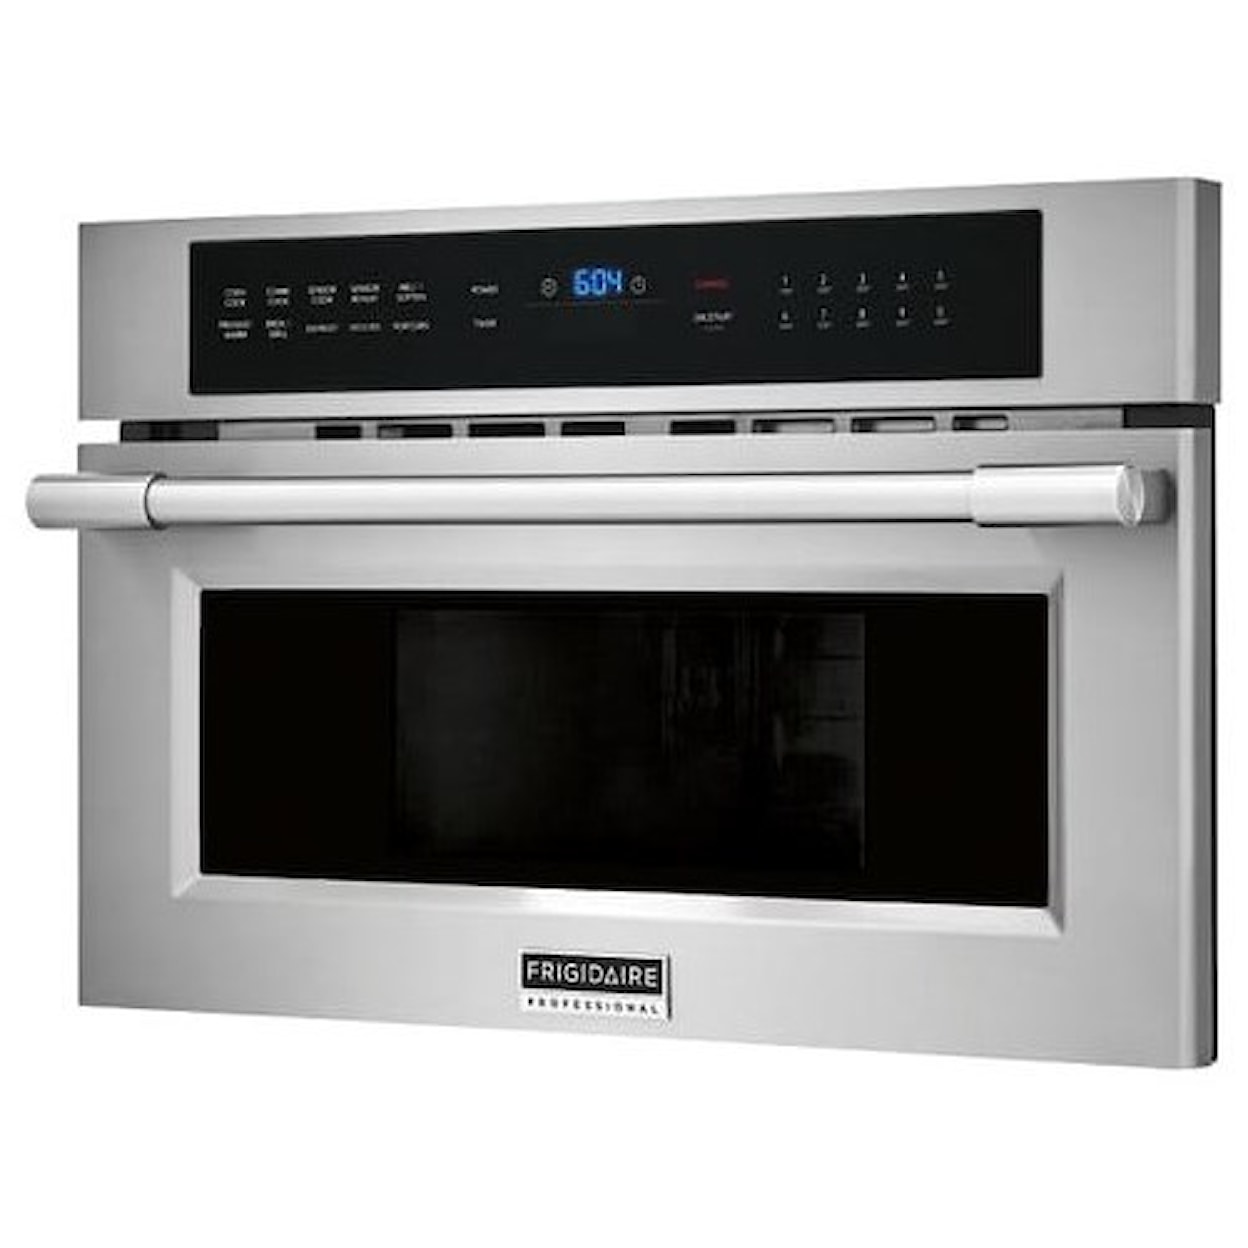 Frigidaire Microwaves 30" Built-In Convection Microwave Oven